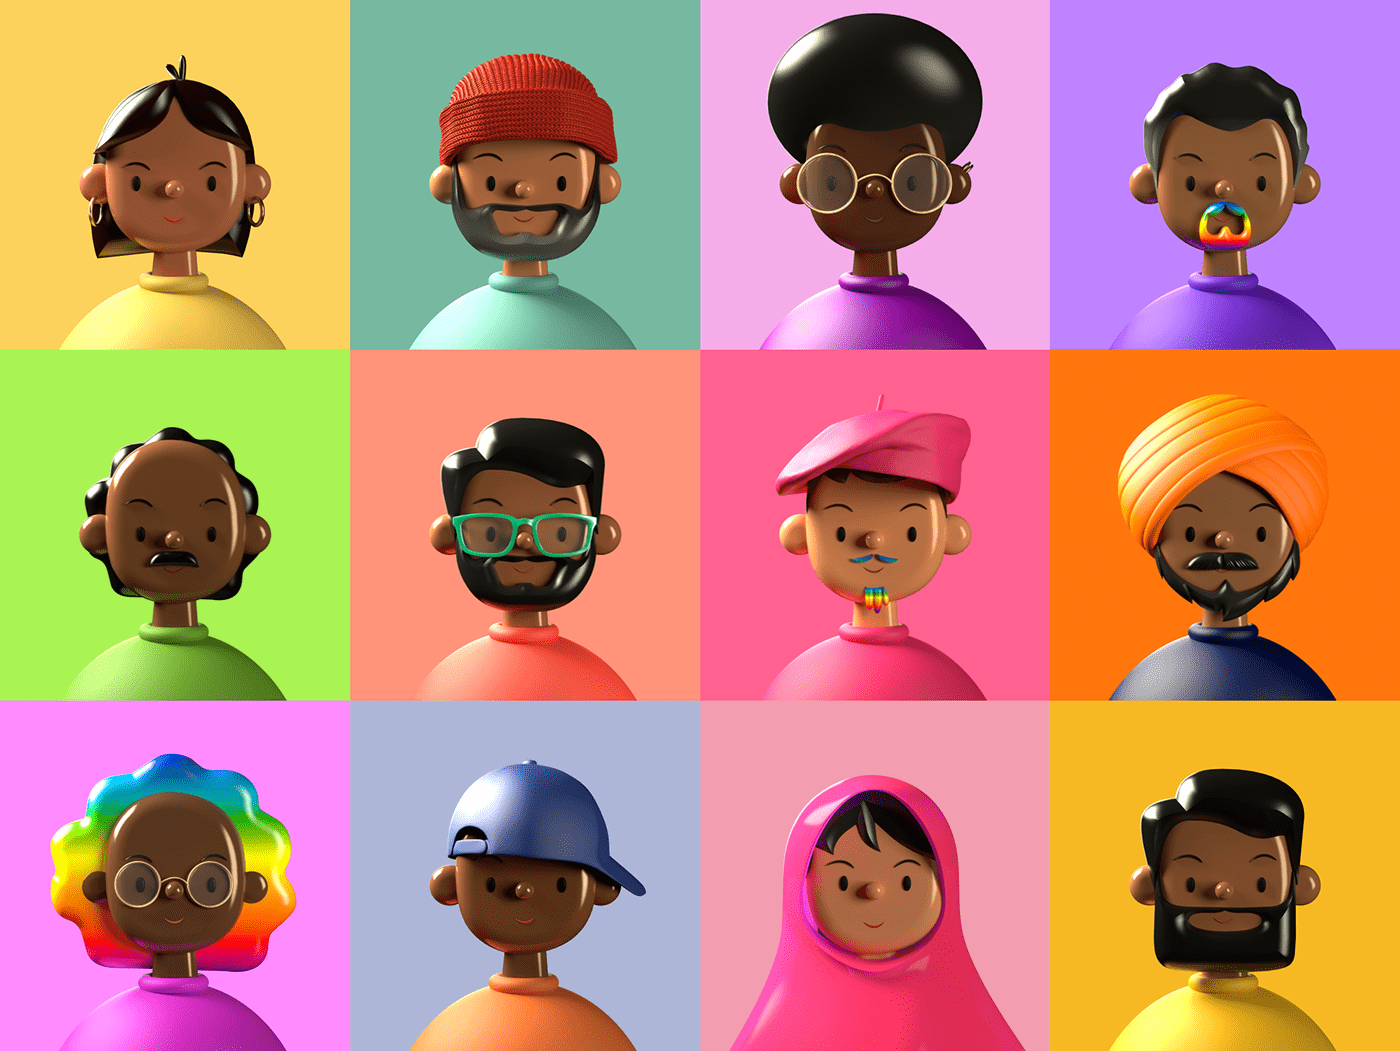 Toy Faces Library — Diverse 3D Avatars on Behance